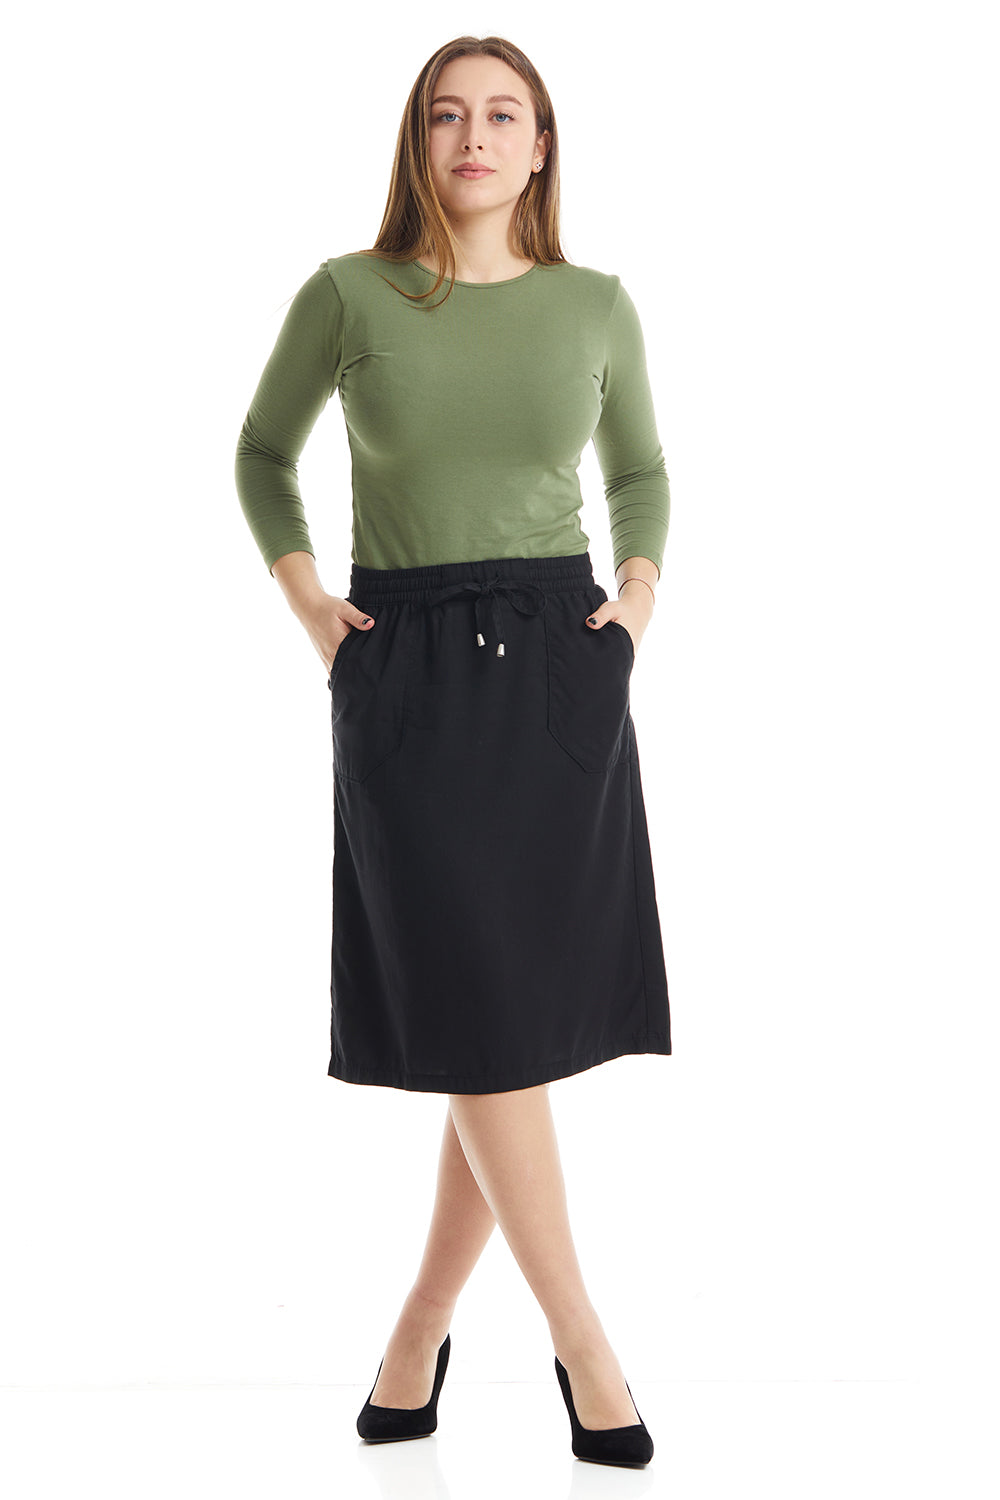 black knee length modest a-line flary skirt with pockets and drawstring waistband